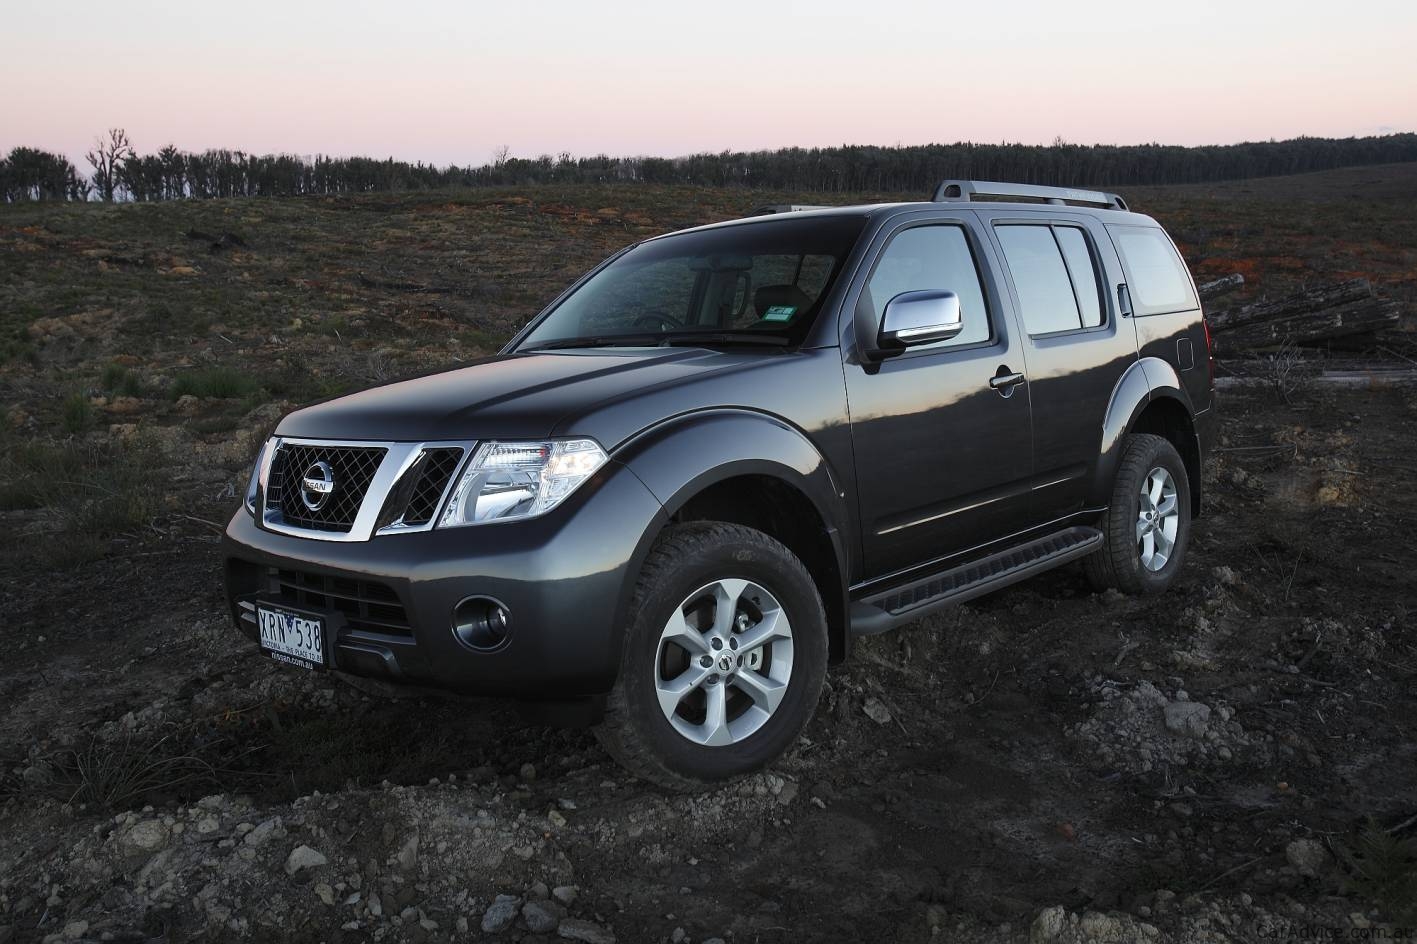 23000231 Nissan pathfinder review #4